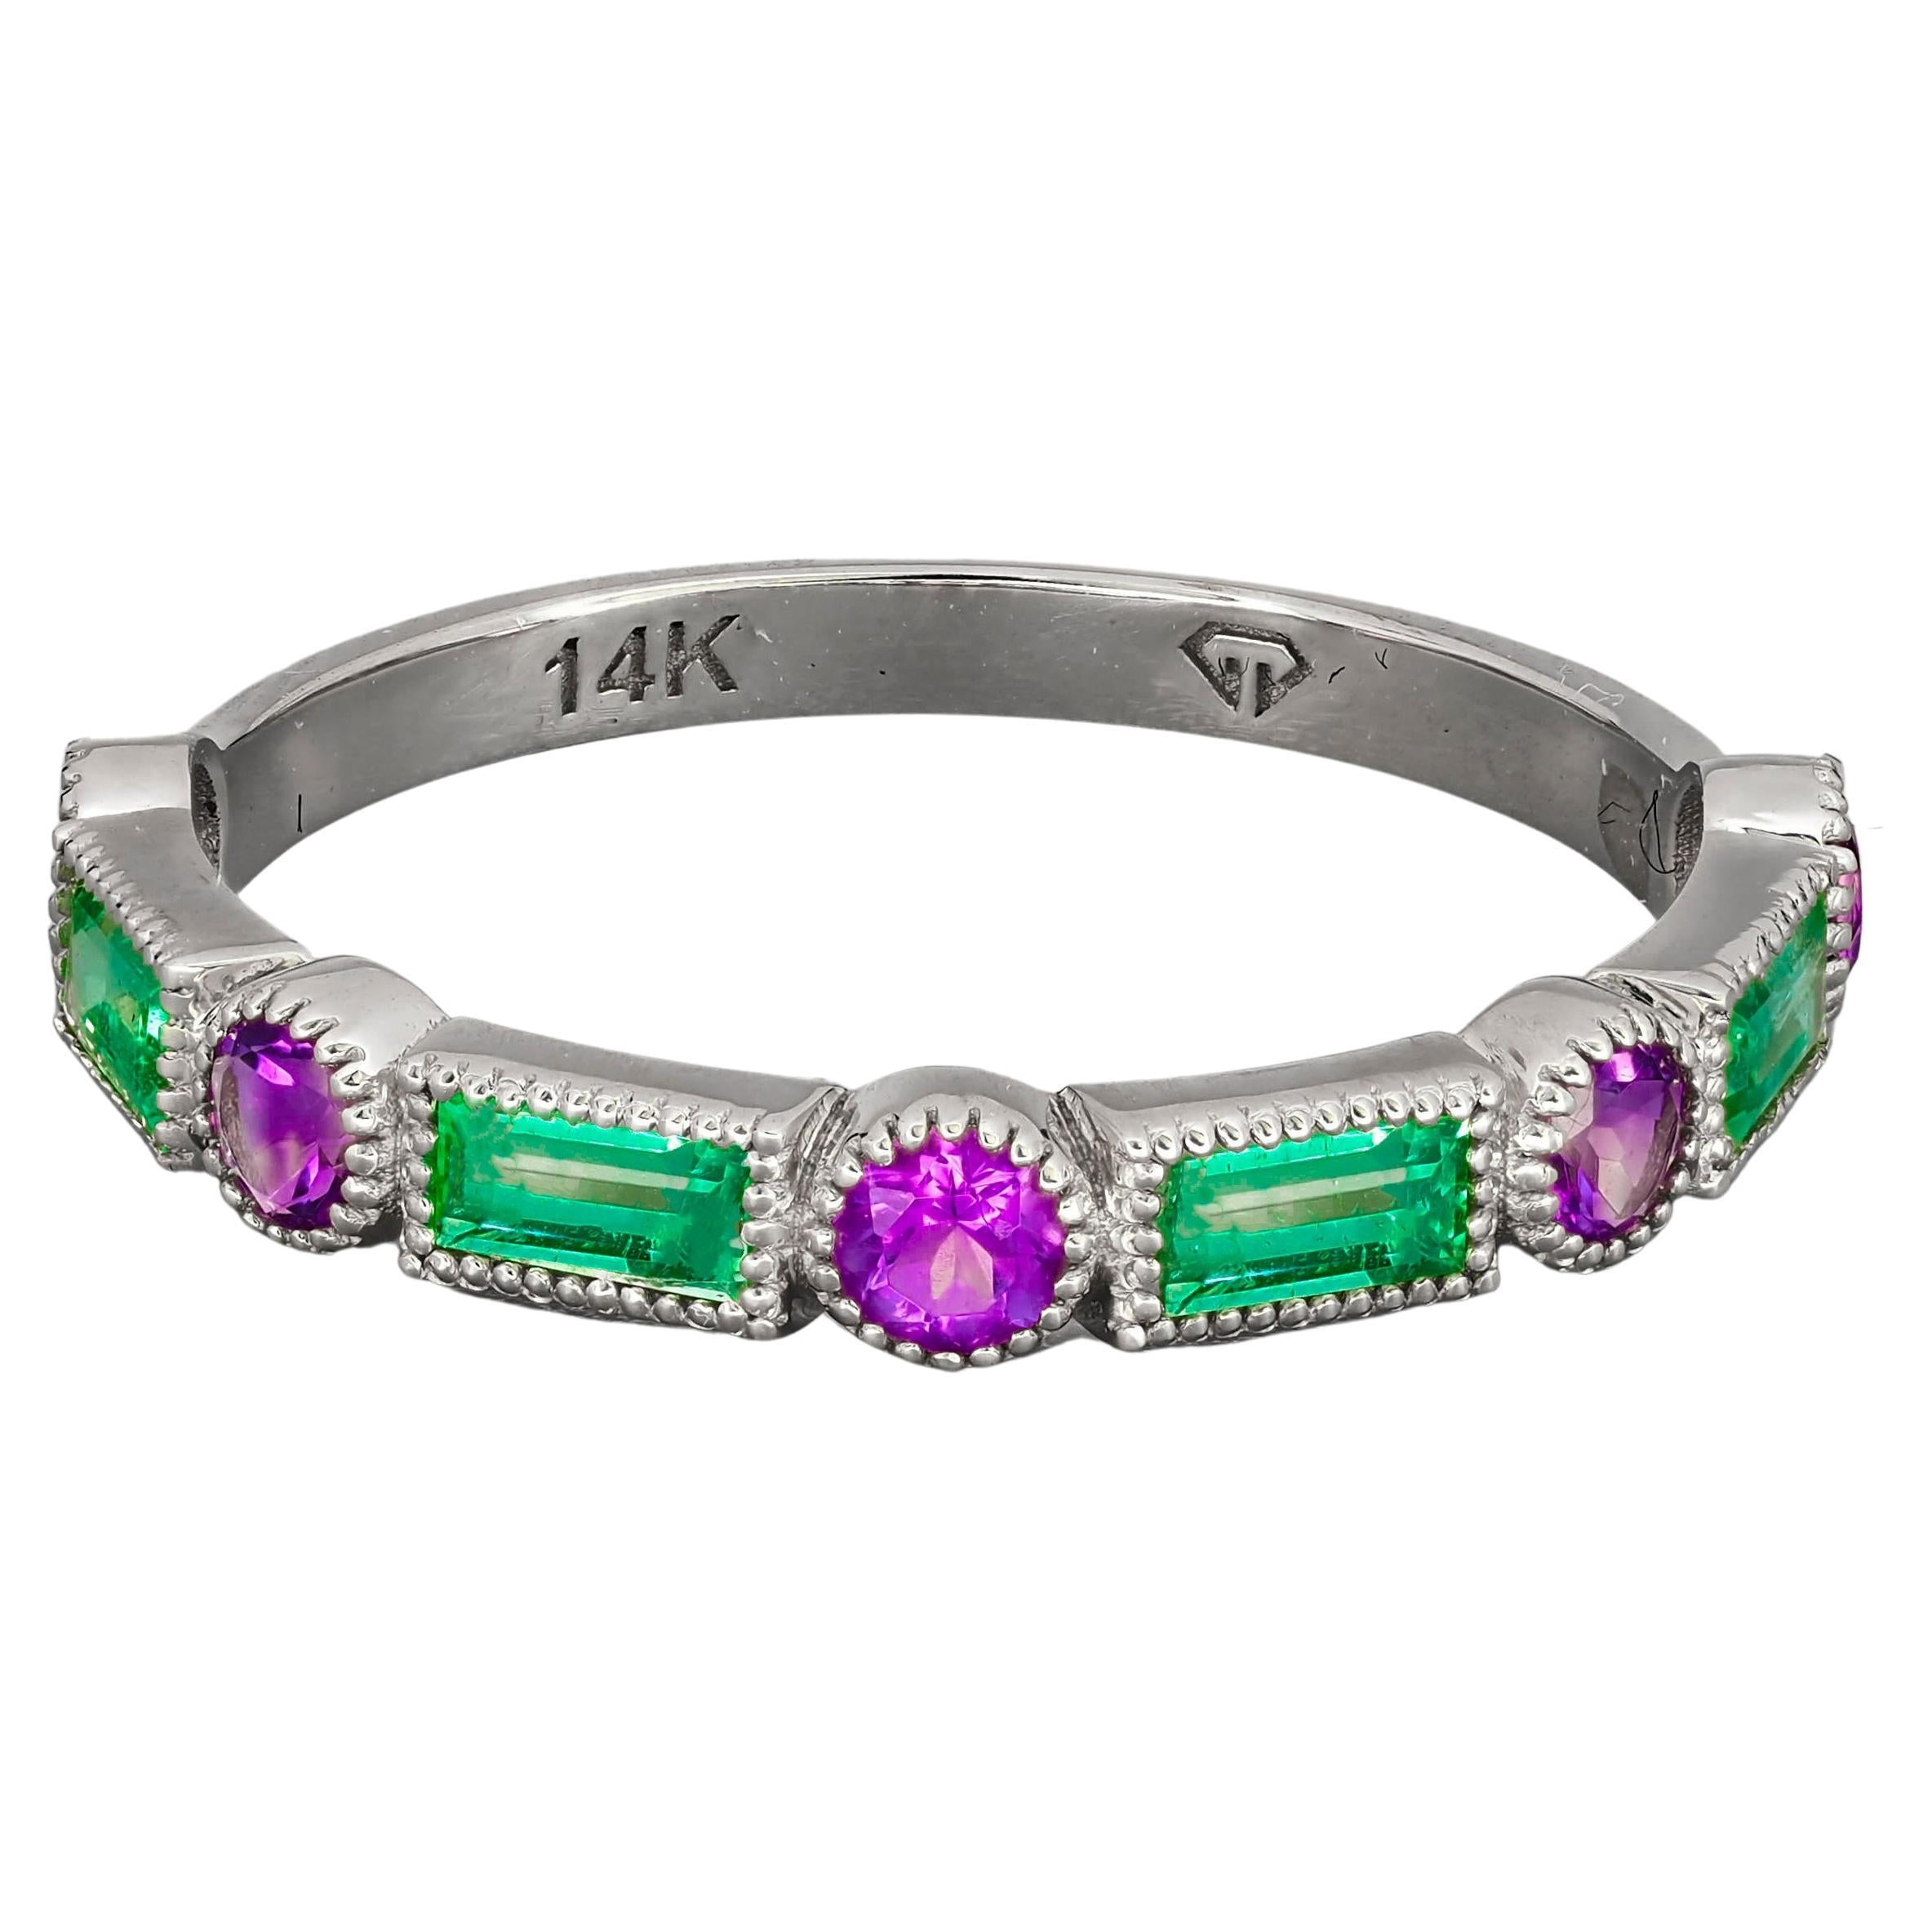 14k Gold Semi-Eternity Ring with Emeralds and Amethysts